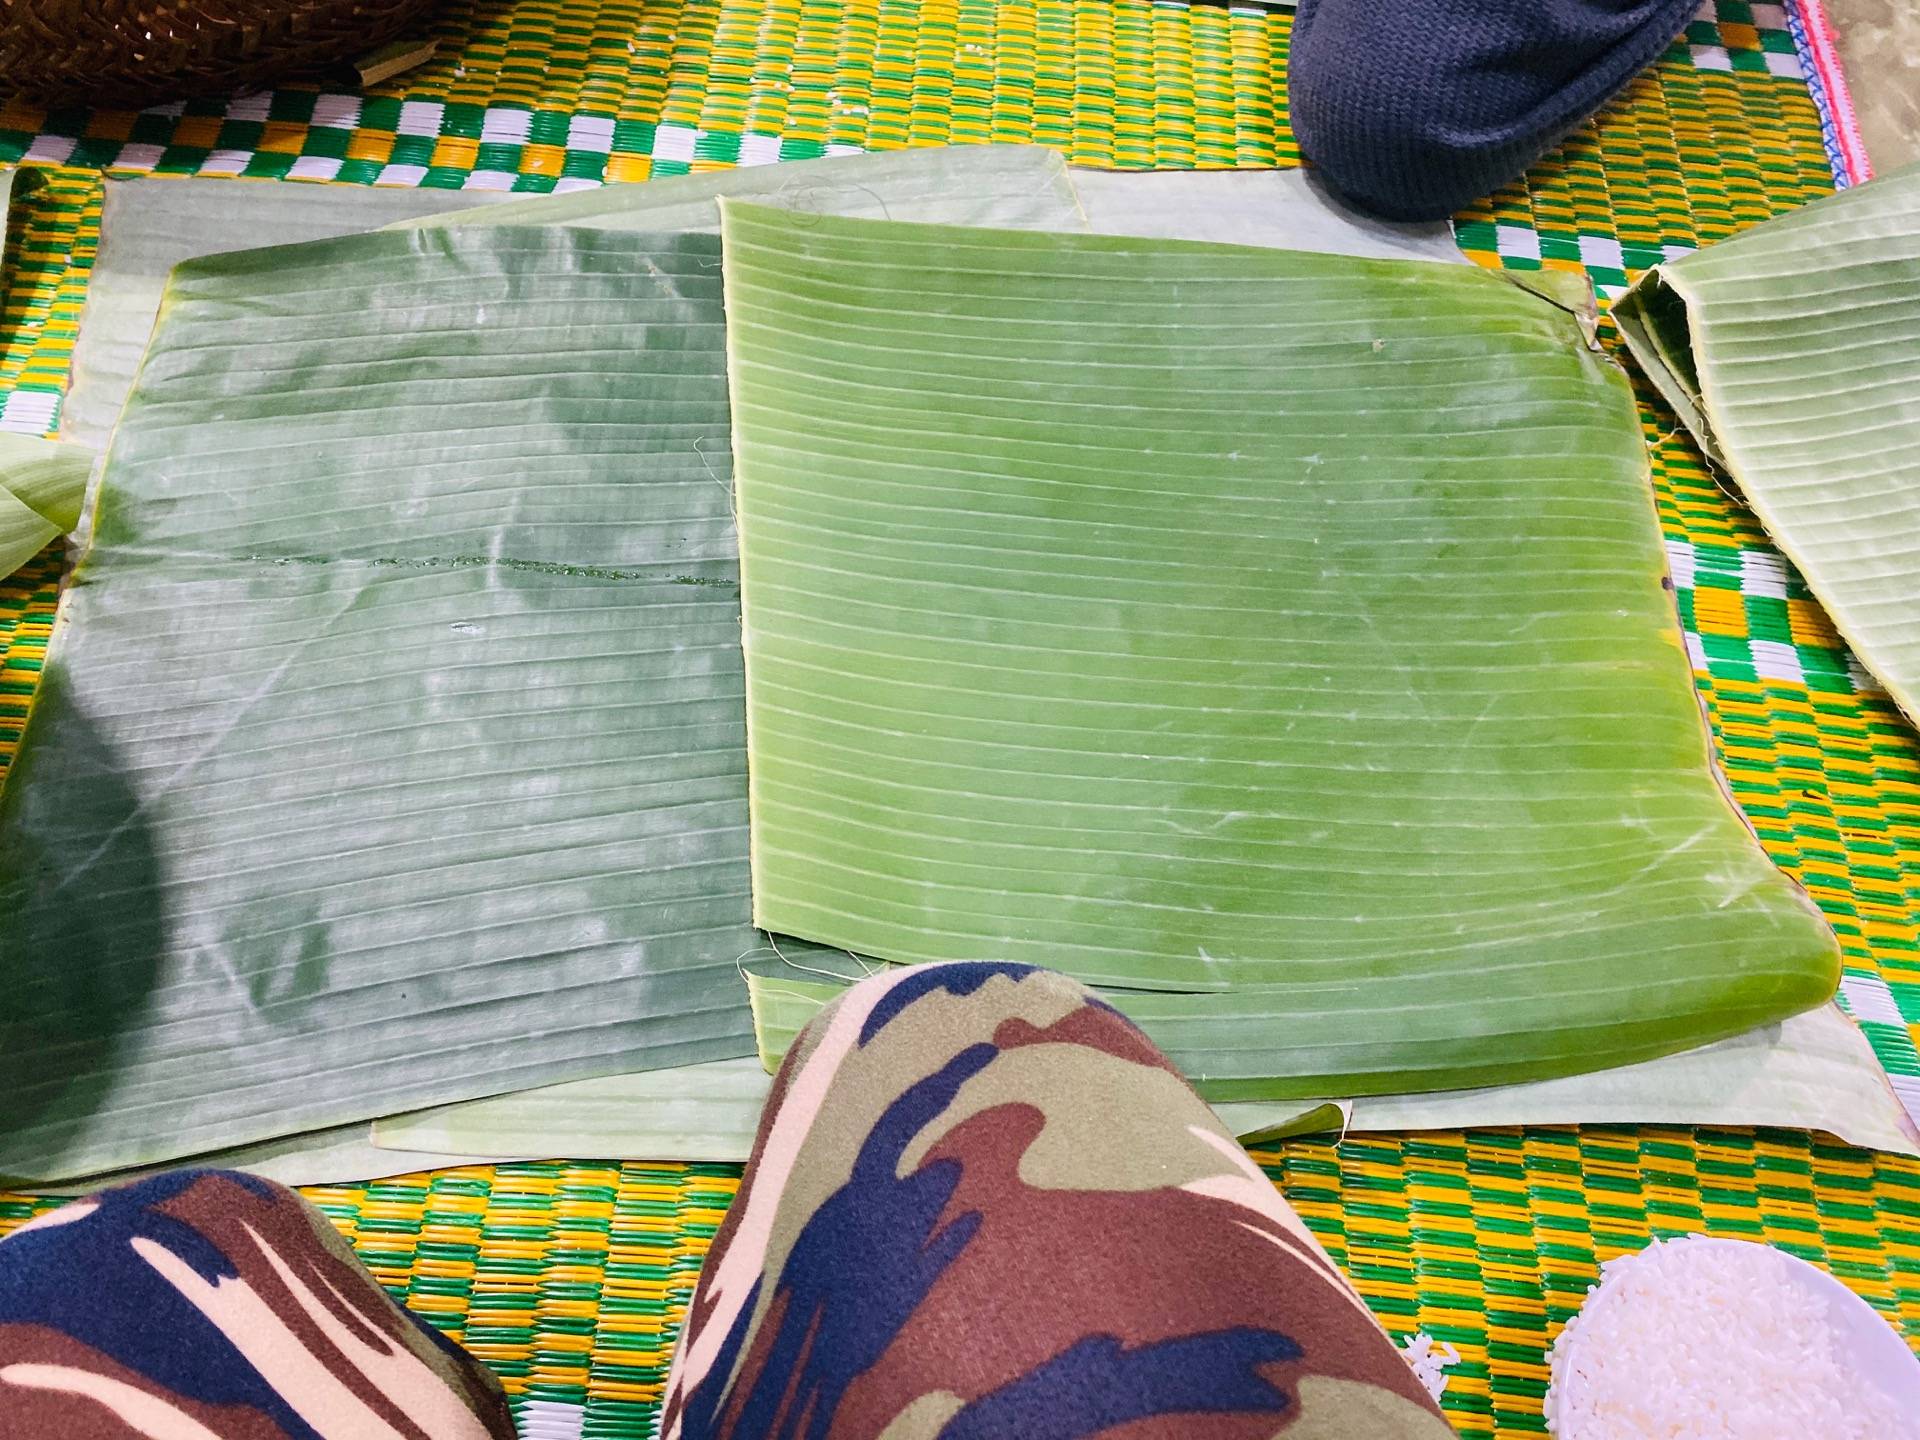 Lay out the banana leaves. You will need four in total 